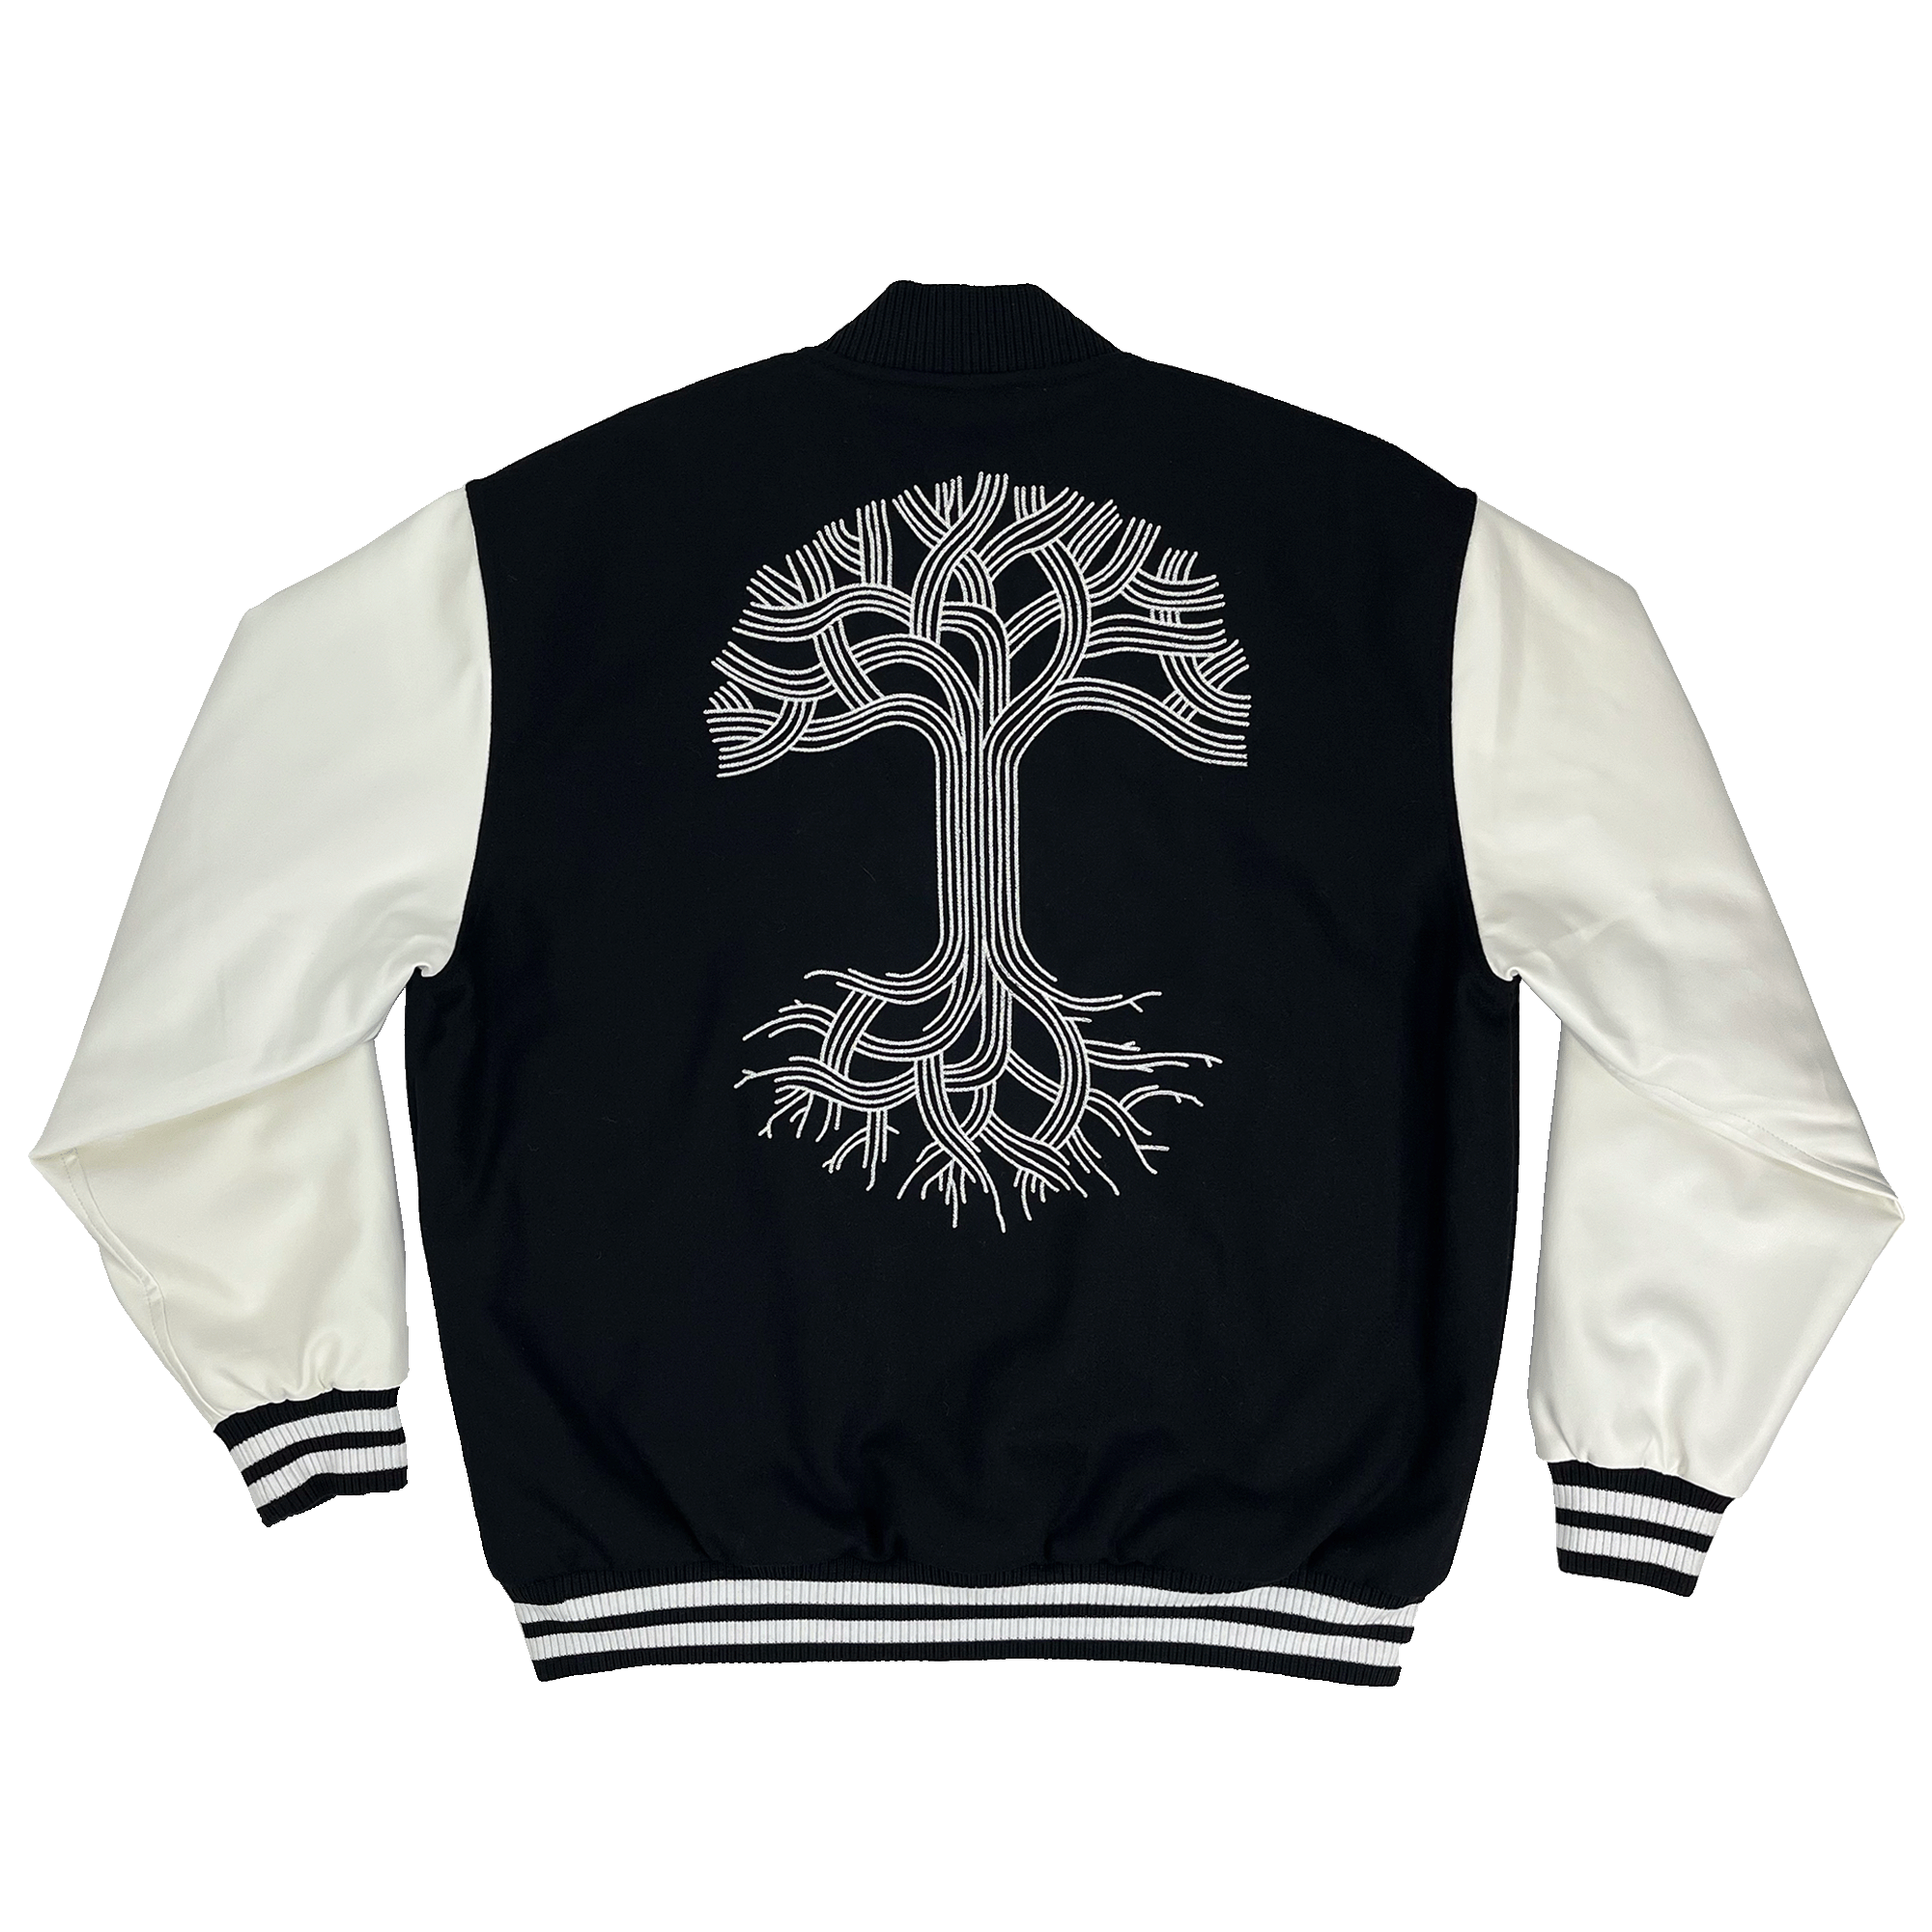 The backside of a black varsity jacket with white sleeves and black and white striped trim and a large Oaklandish tree logo in the center back.